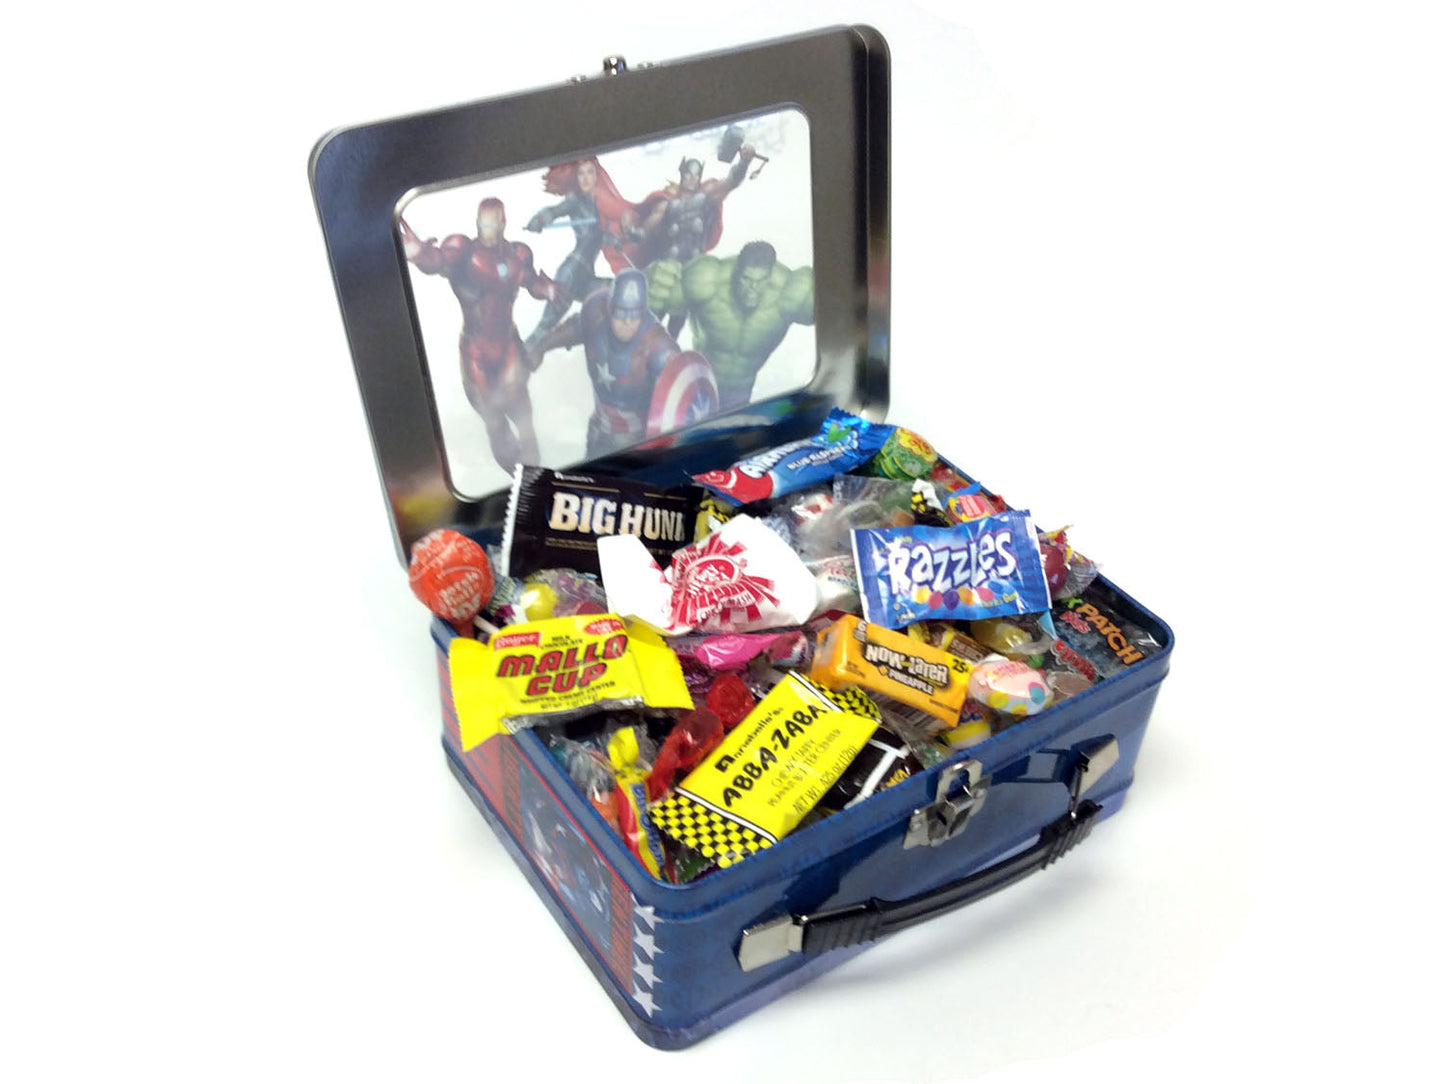 Lunch Box - Avengers Window Box - Penny Candy assortment